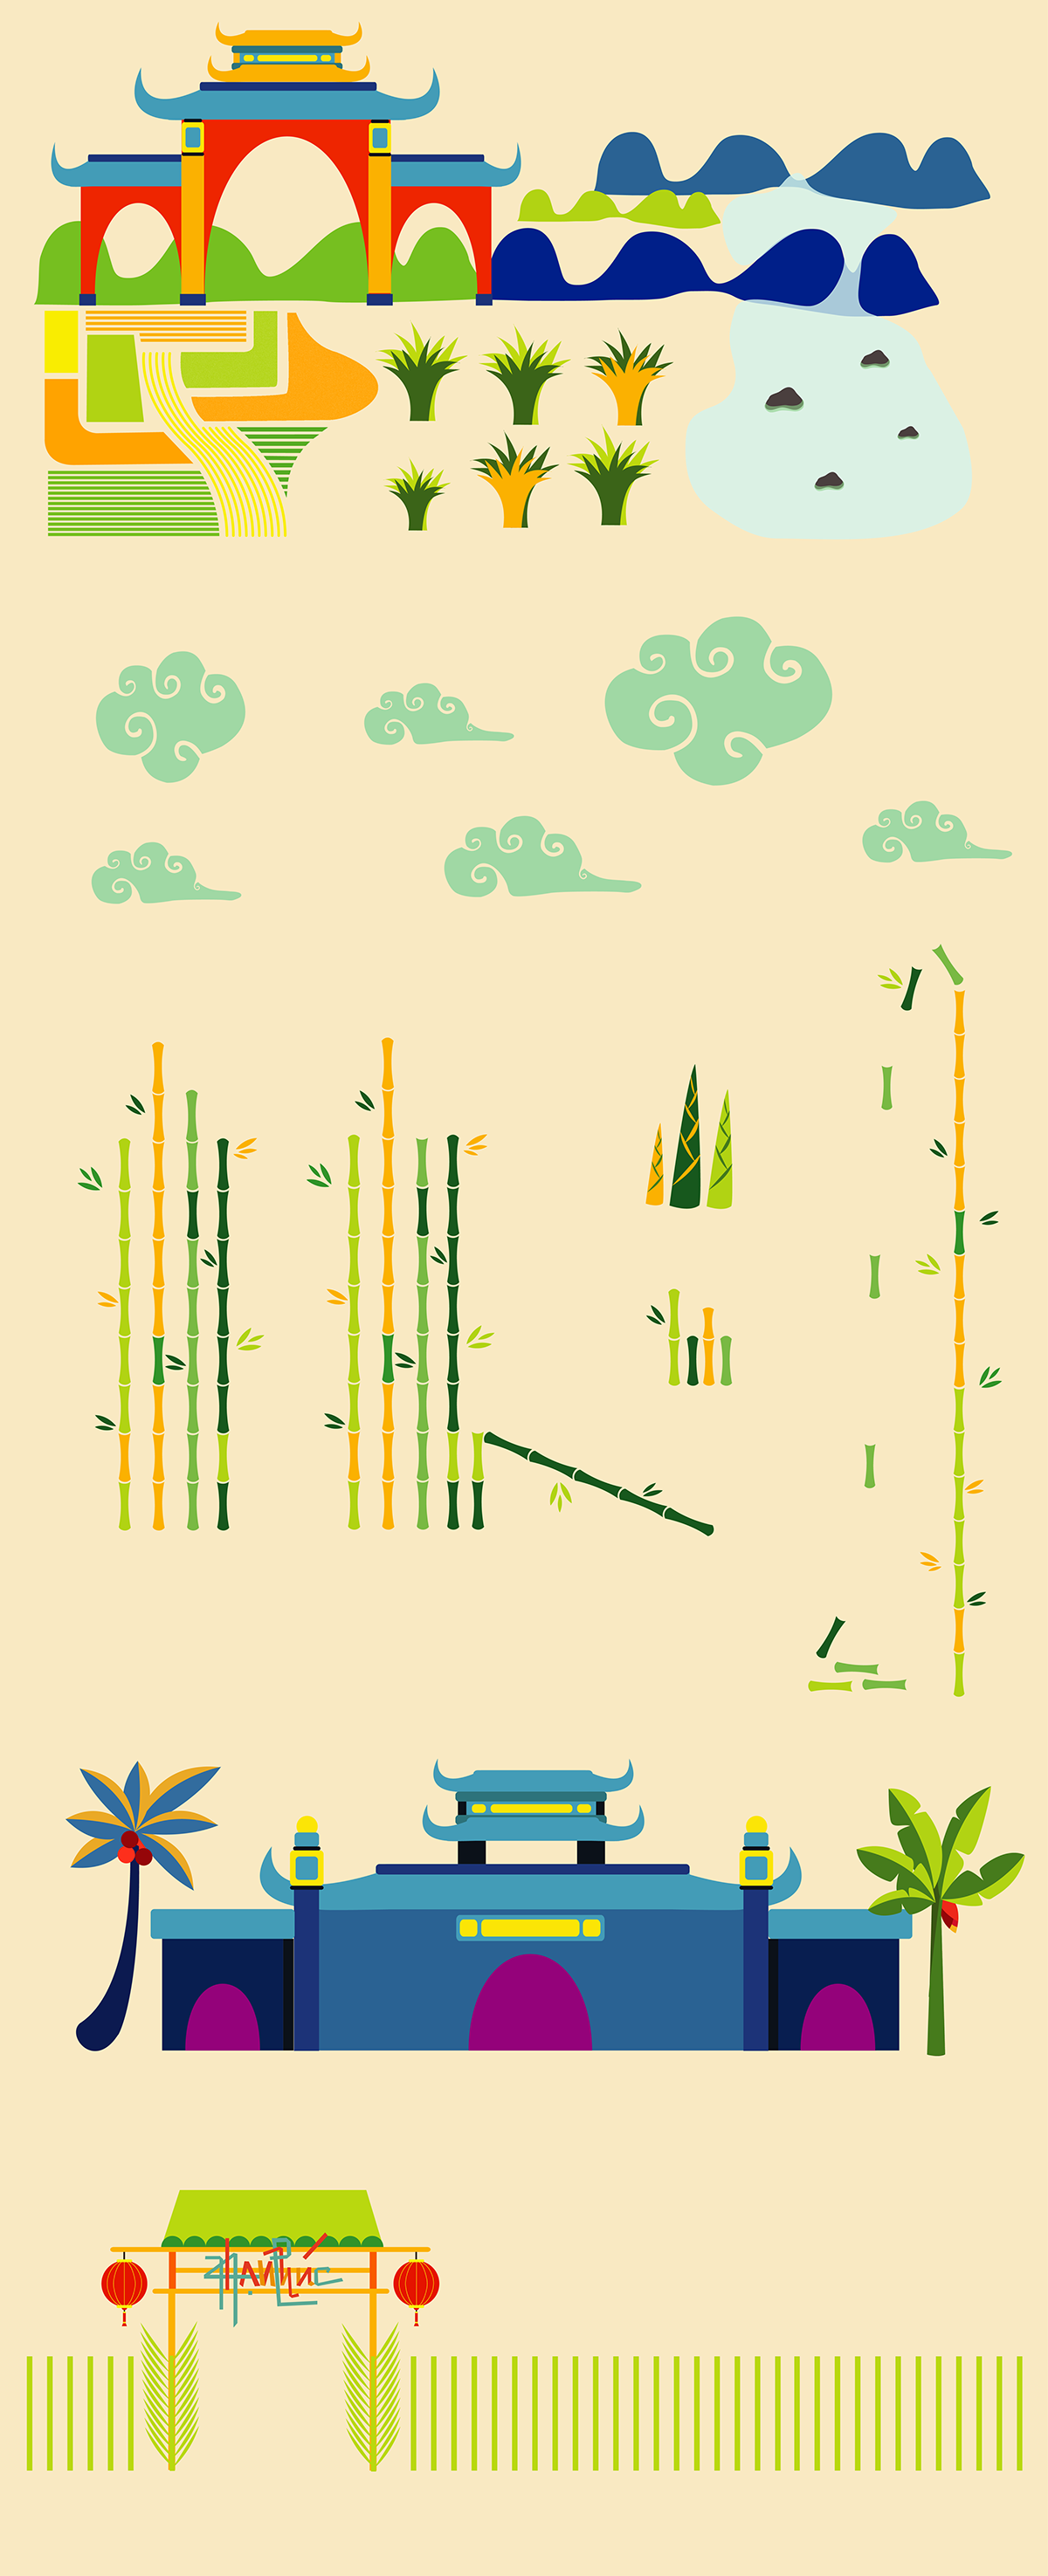 illutration graphic design bamboo